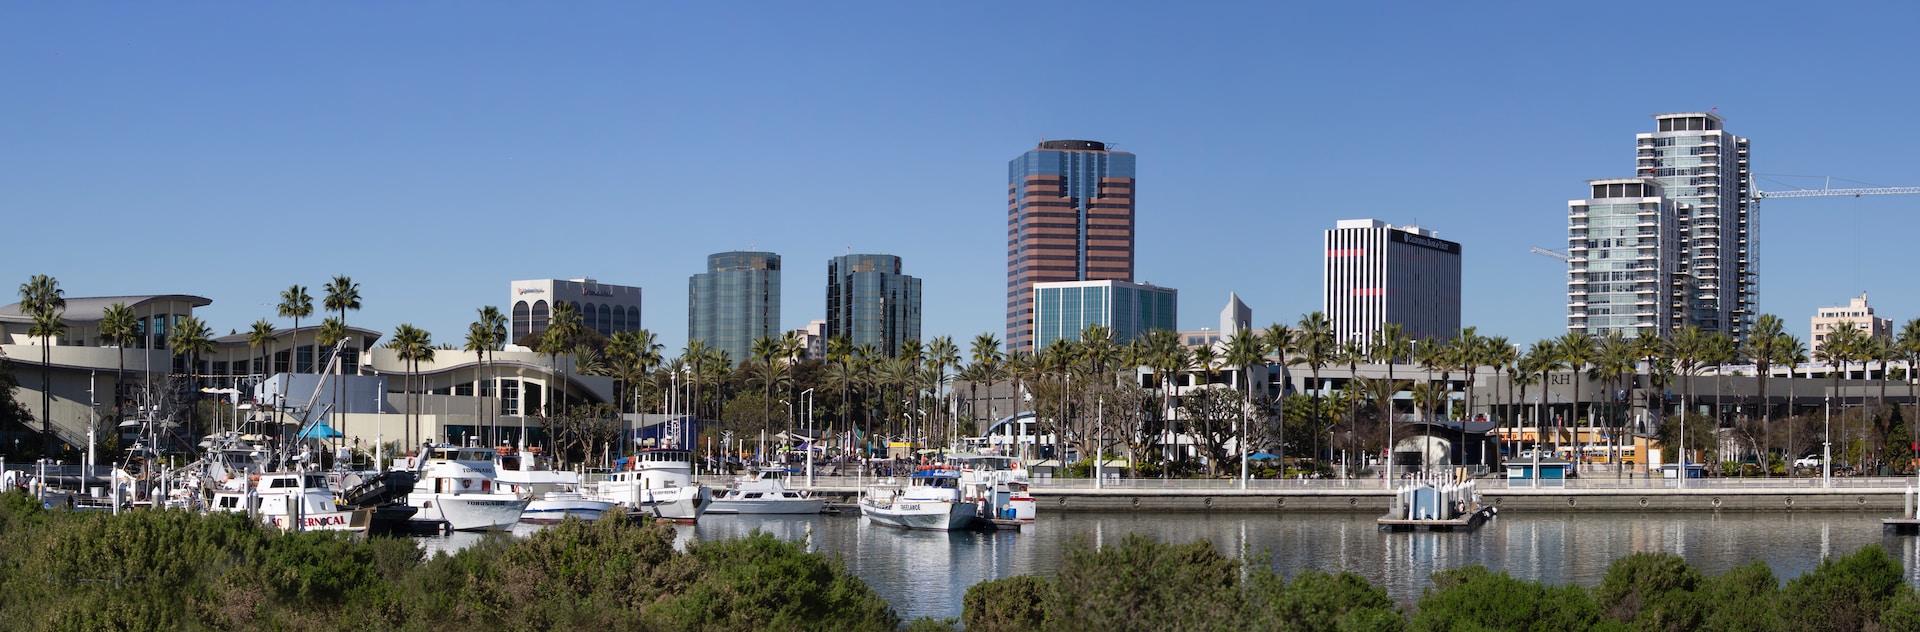 Downtown and Waterfront, Long Beach, CA